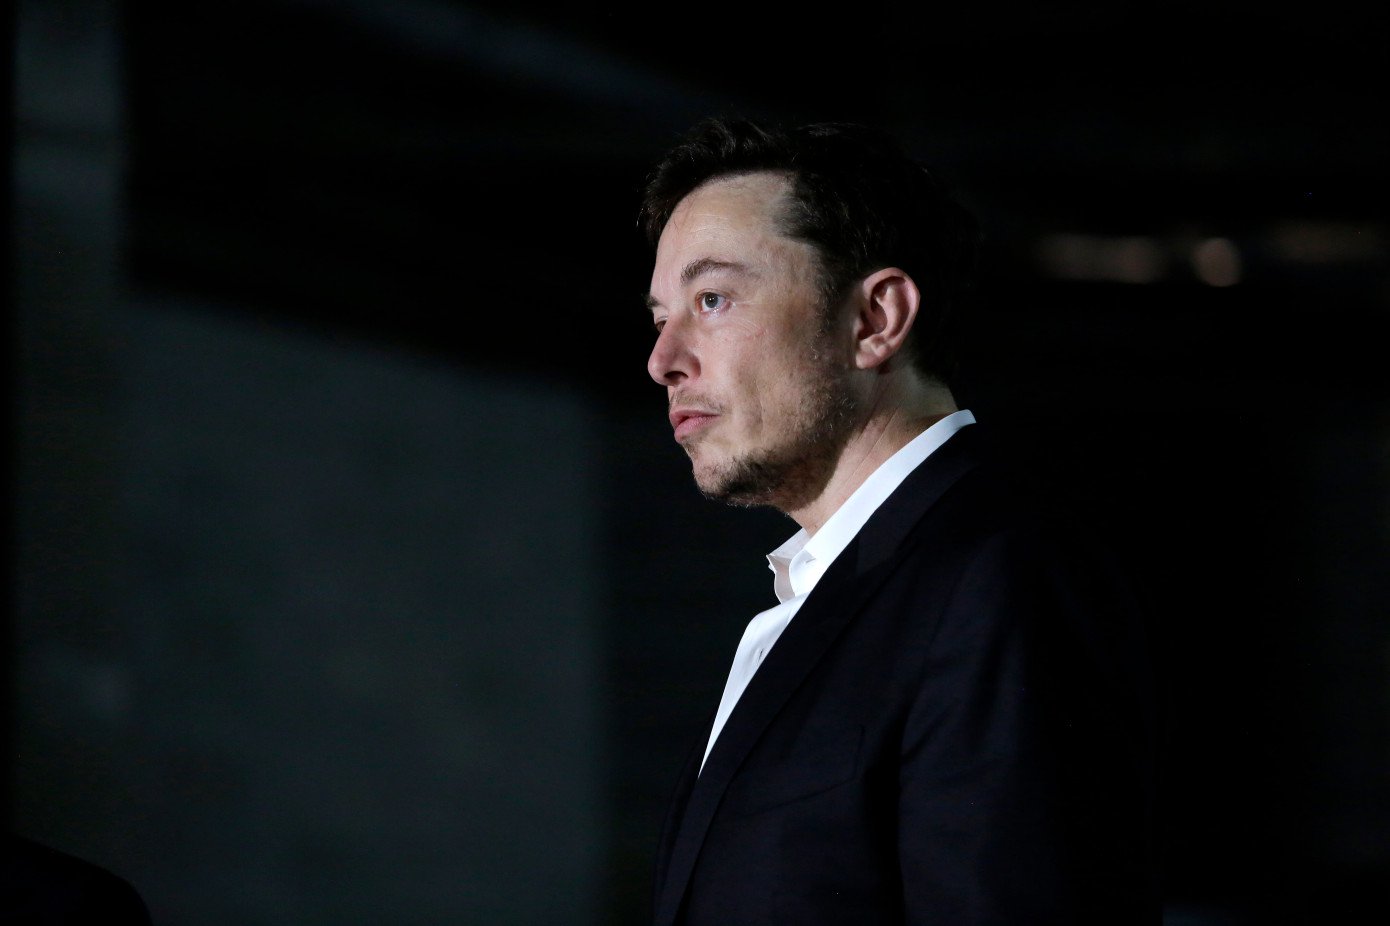 Elon Musk dismissed at the request of the SEC. Tesla fined $ 20 million